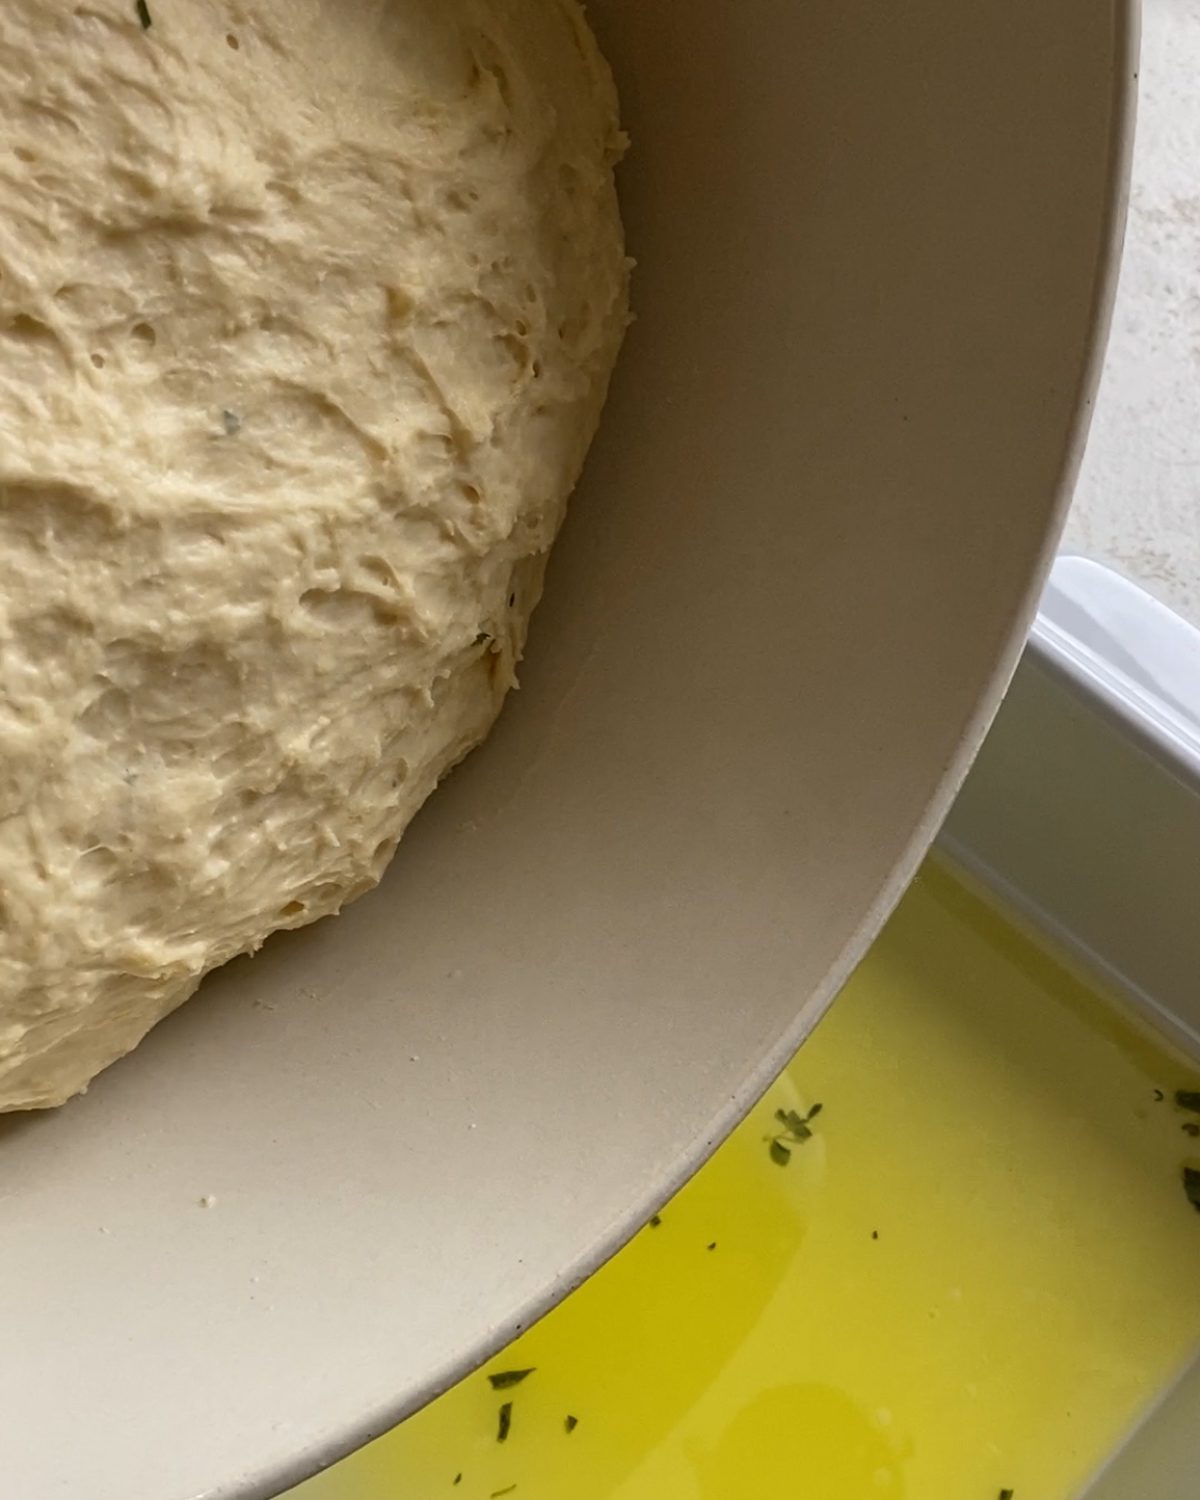 process of adding dough to pan of oil and herb mixture